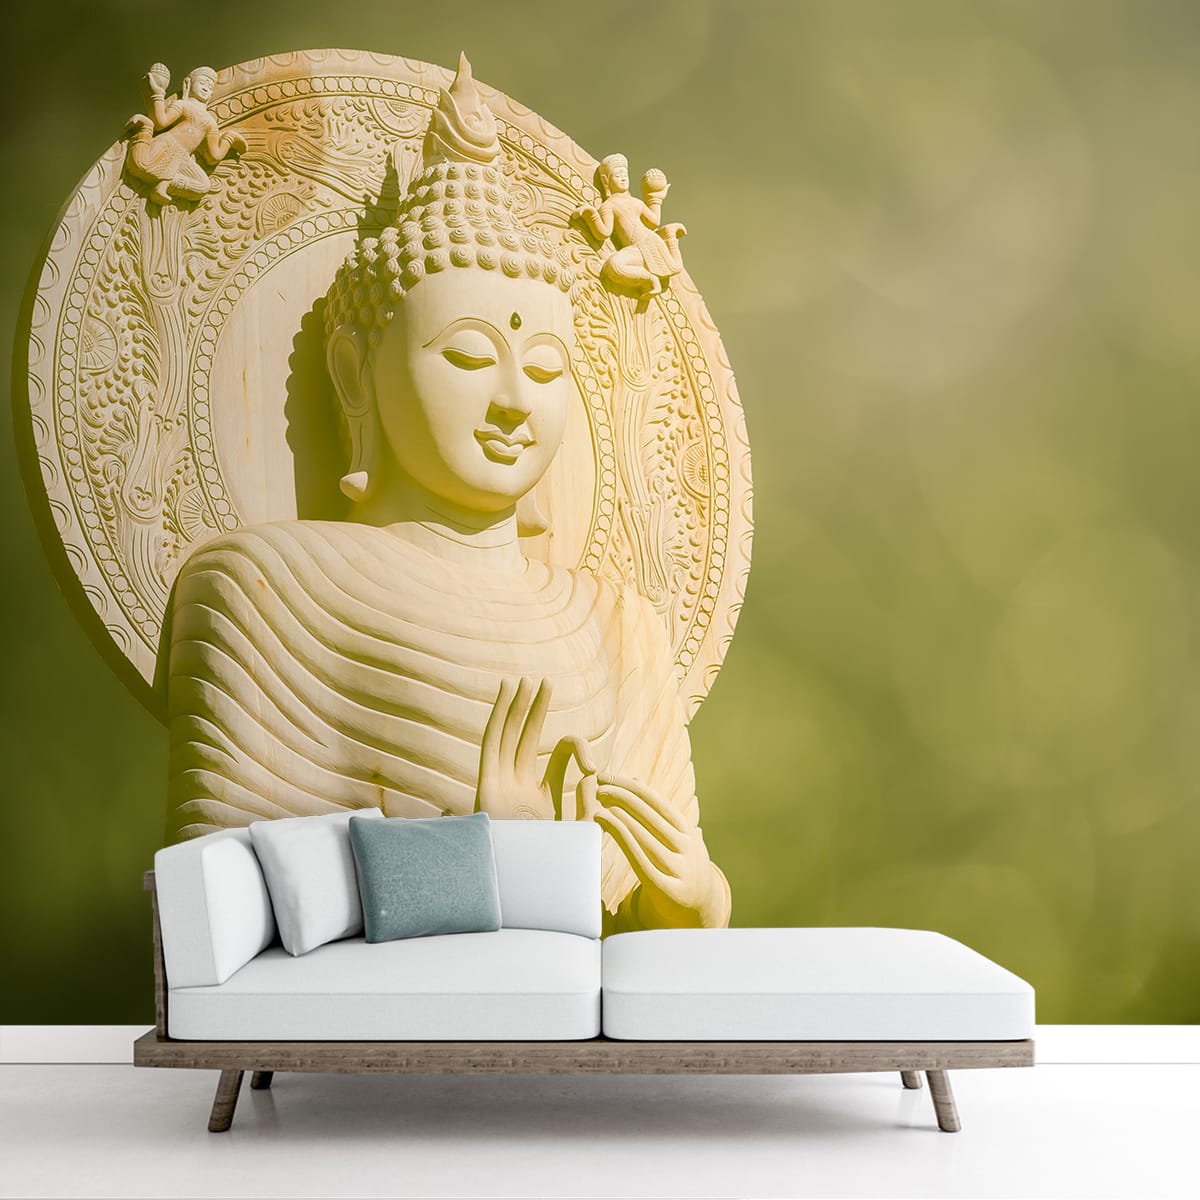 3D Elegant Buddha Wa3D Elegant Buddha Wallpaper for Homes and Offices,Customisedllpaper for Homes and Offices